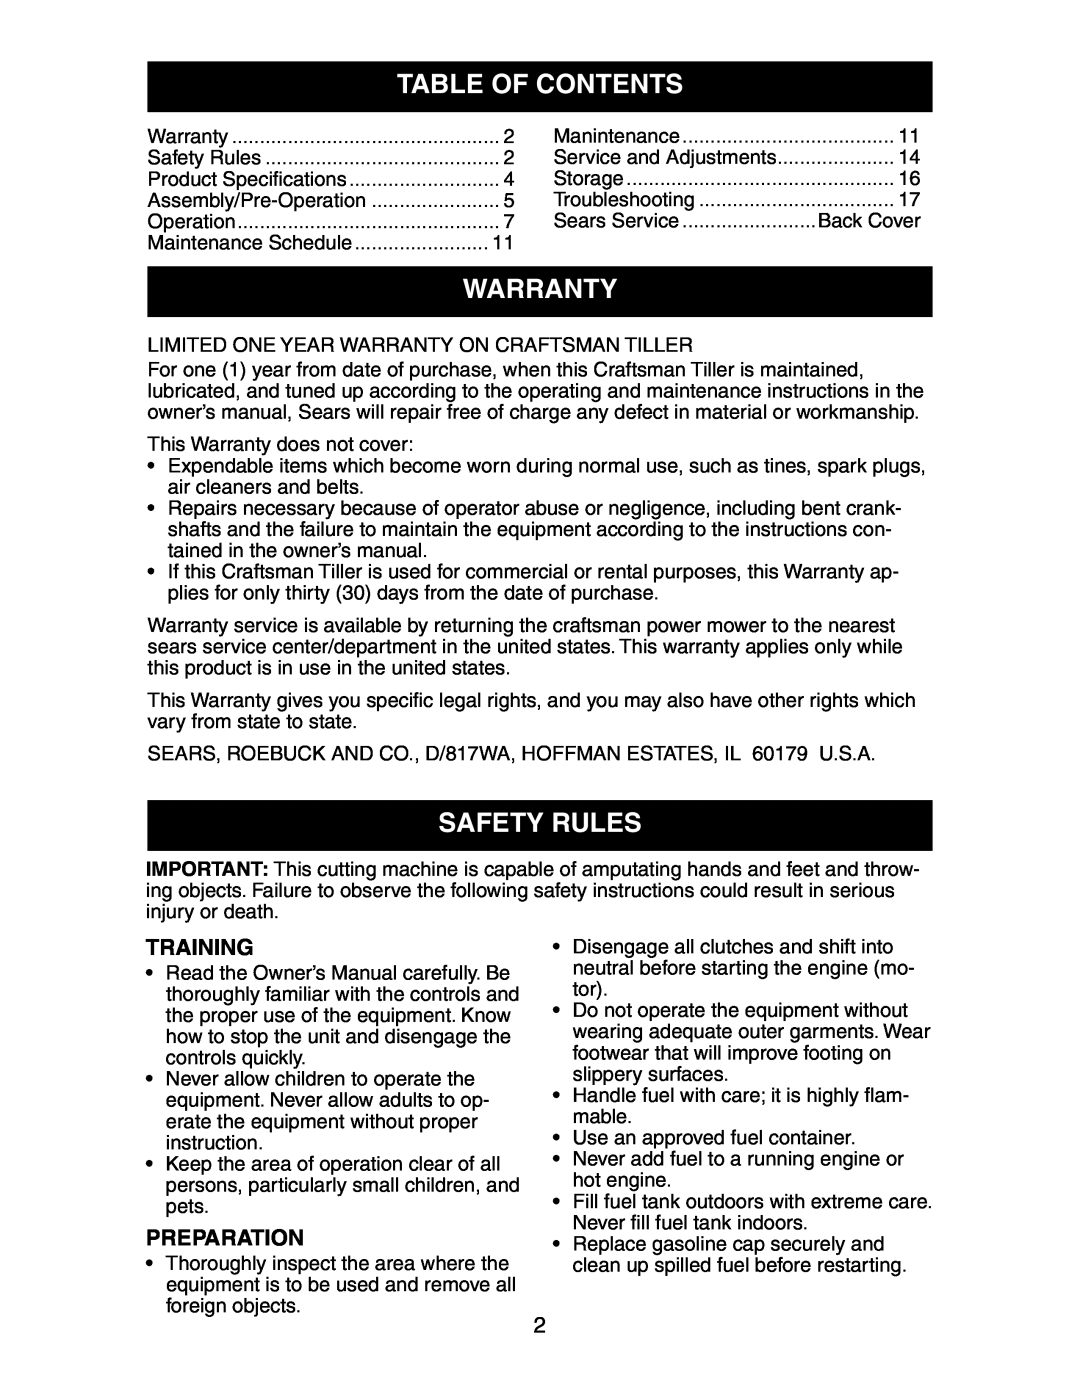 Sears 917.29149 owner manual Table Of Contents, Warranty, Safety Rules, Training, Preparation 